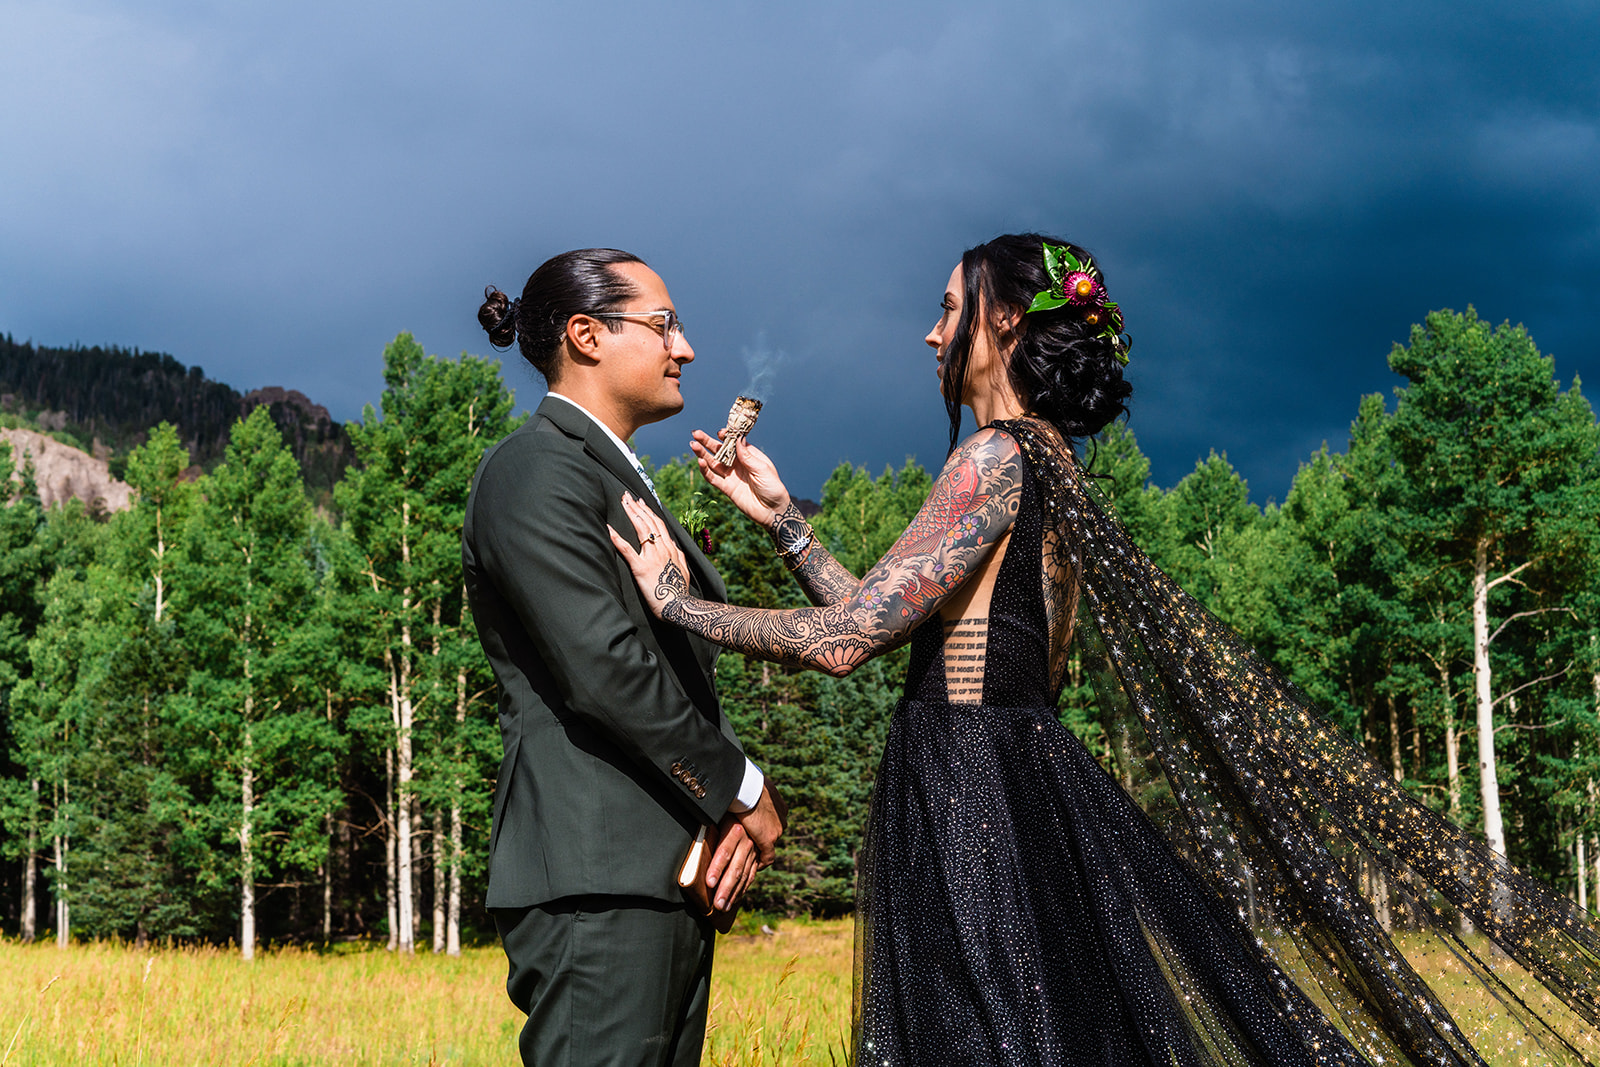 Beautiful bride and groom photos with spooky attire and decor